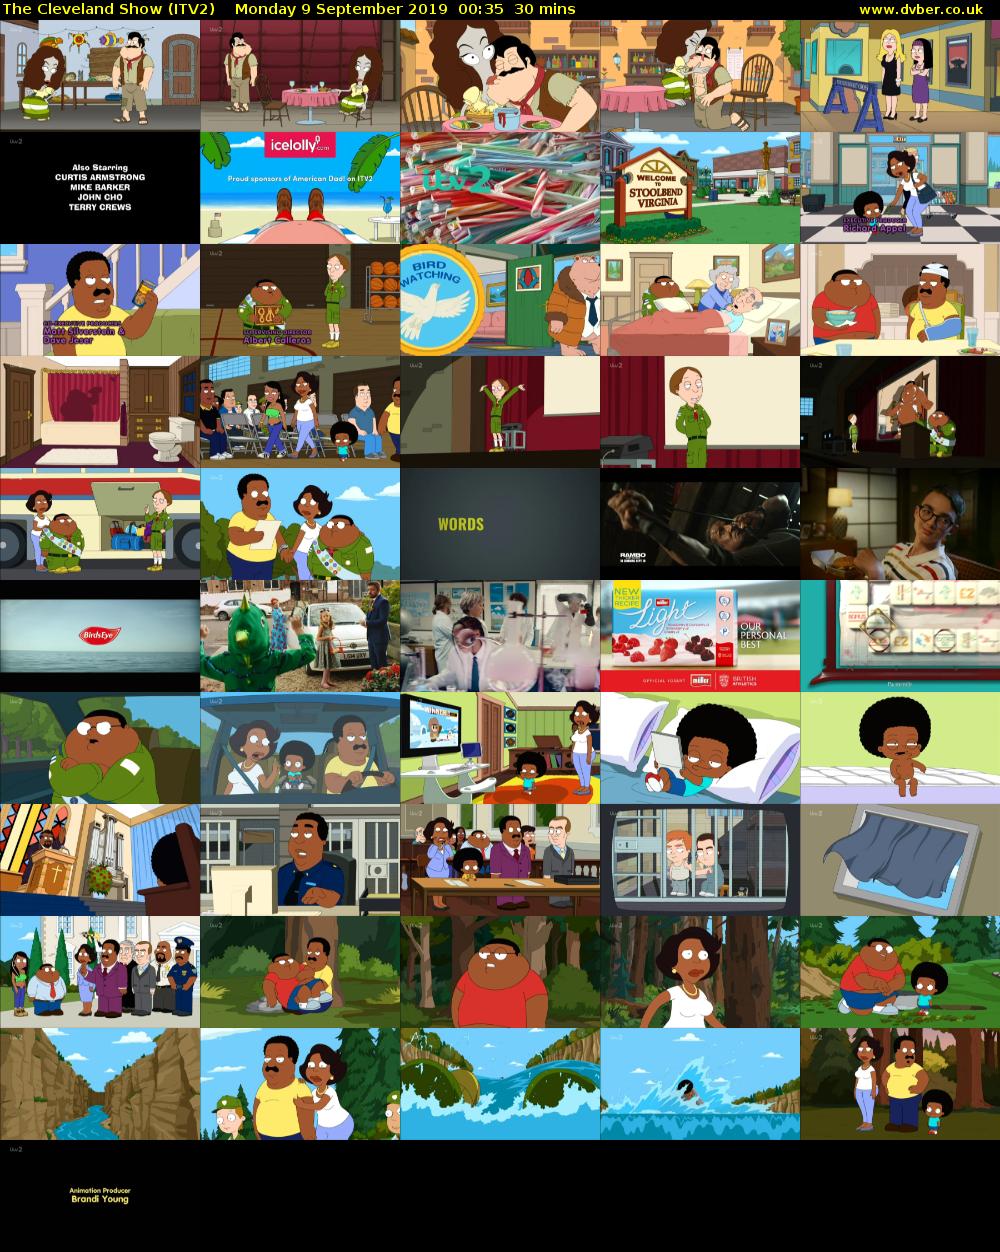 The Cleveland Show (ITV2) Monday 9 September 2019 00:35 - 01:05